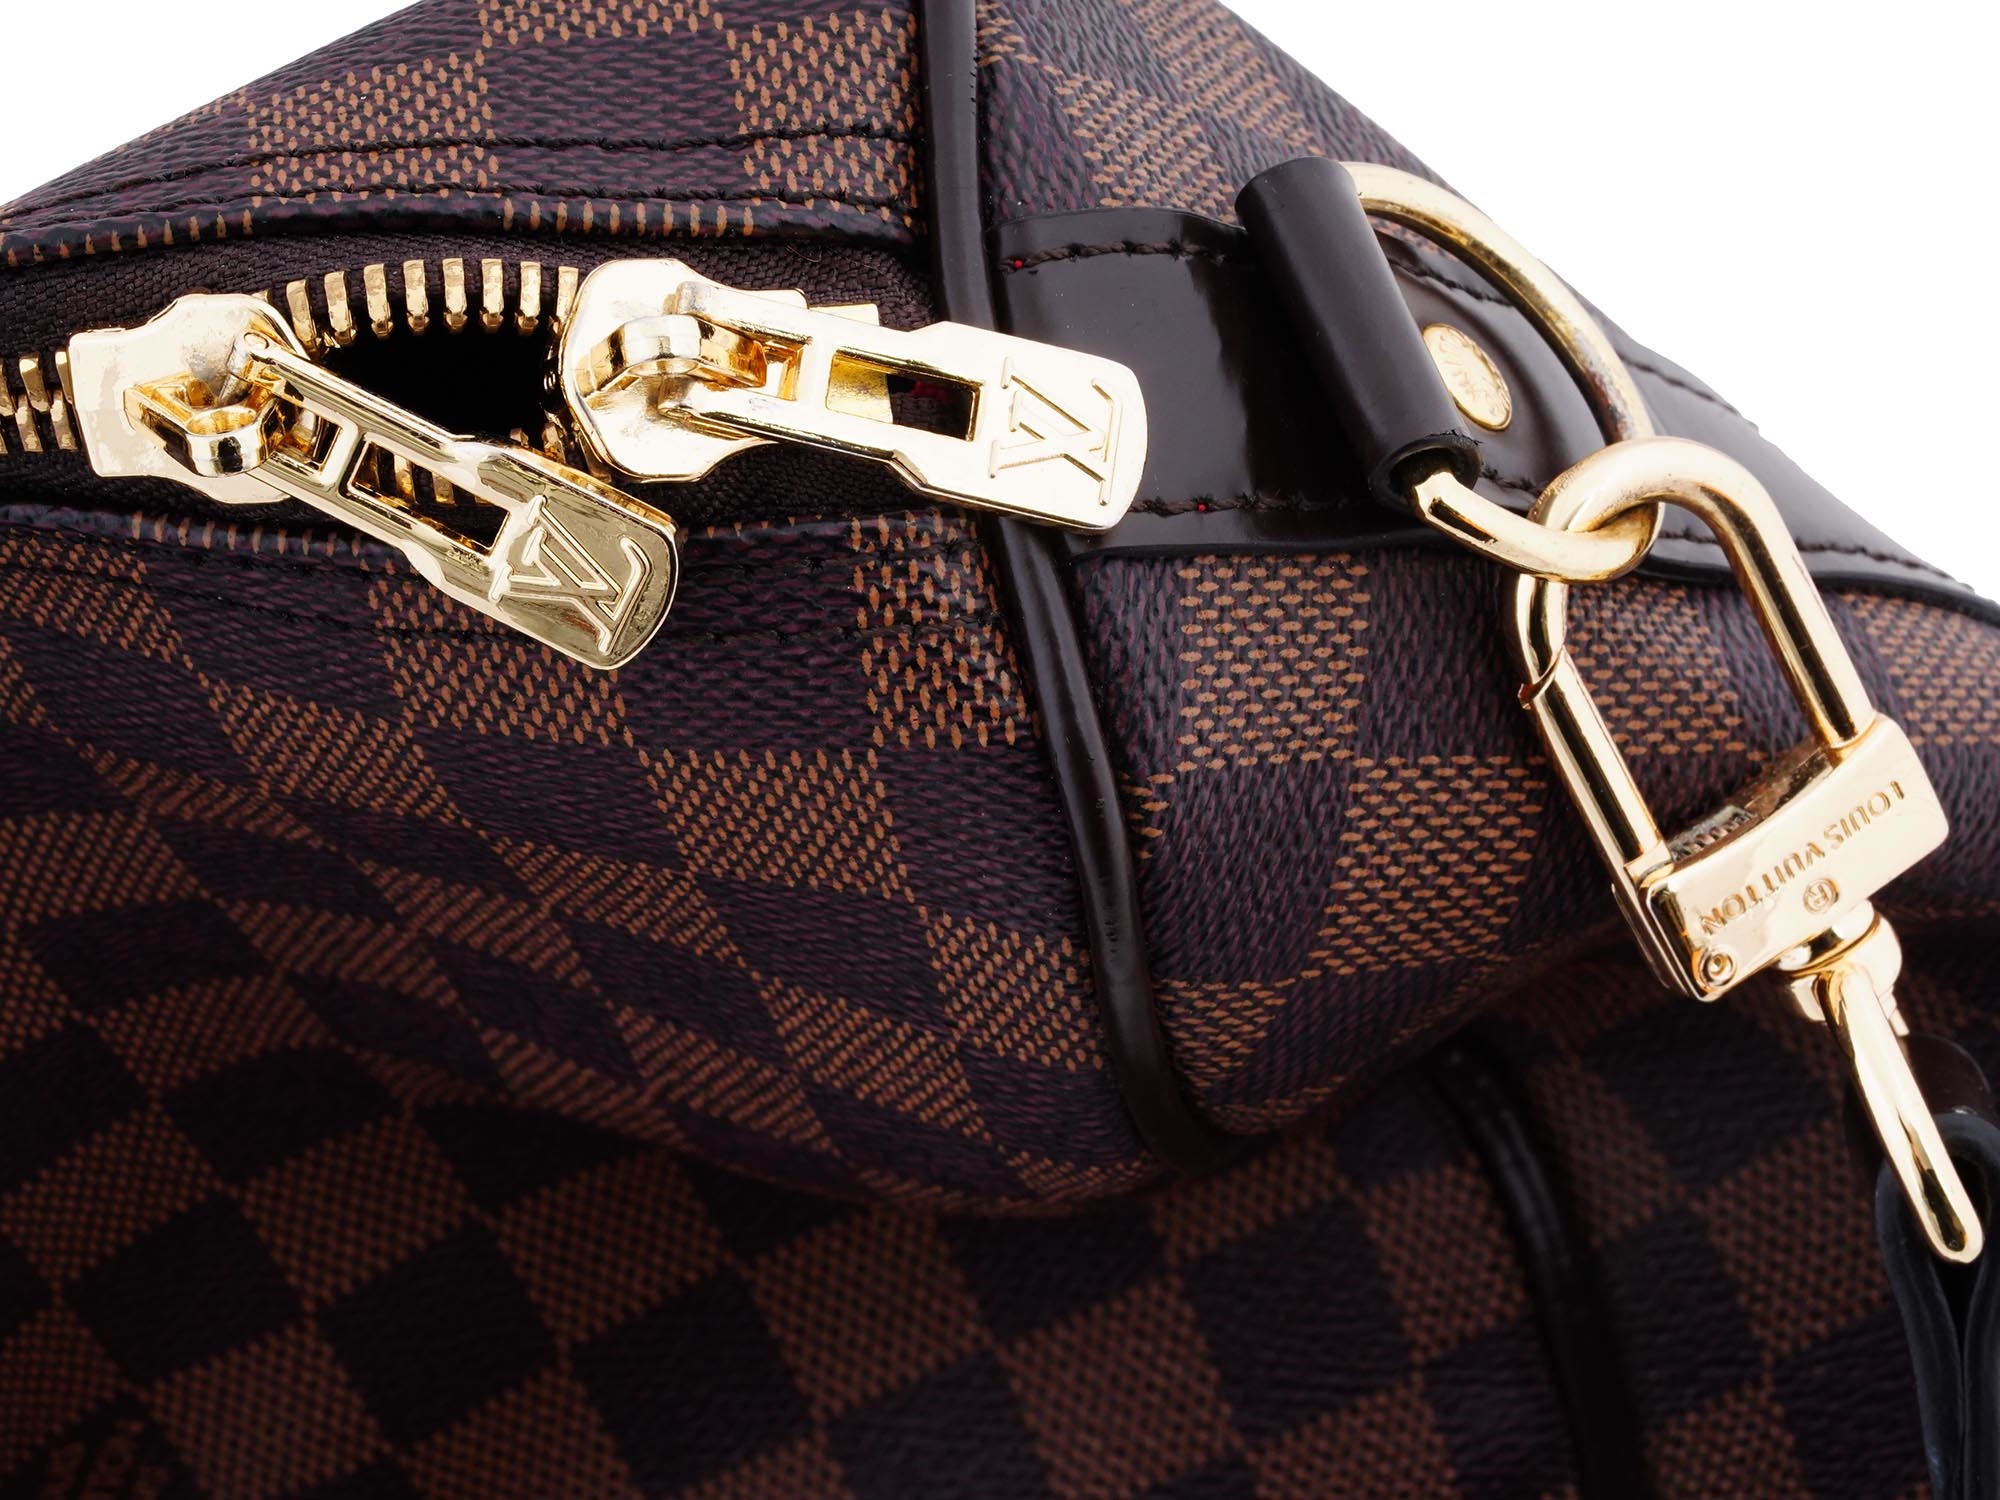 Louis Vuitton  A Louis Vuitton Damier Ebene Keepall Bandouliere 45 bag.  The duffel bag is crafted of damier checkered coated canvas with dark brown  leather accents. It features rolled leather top